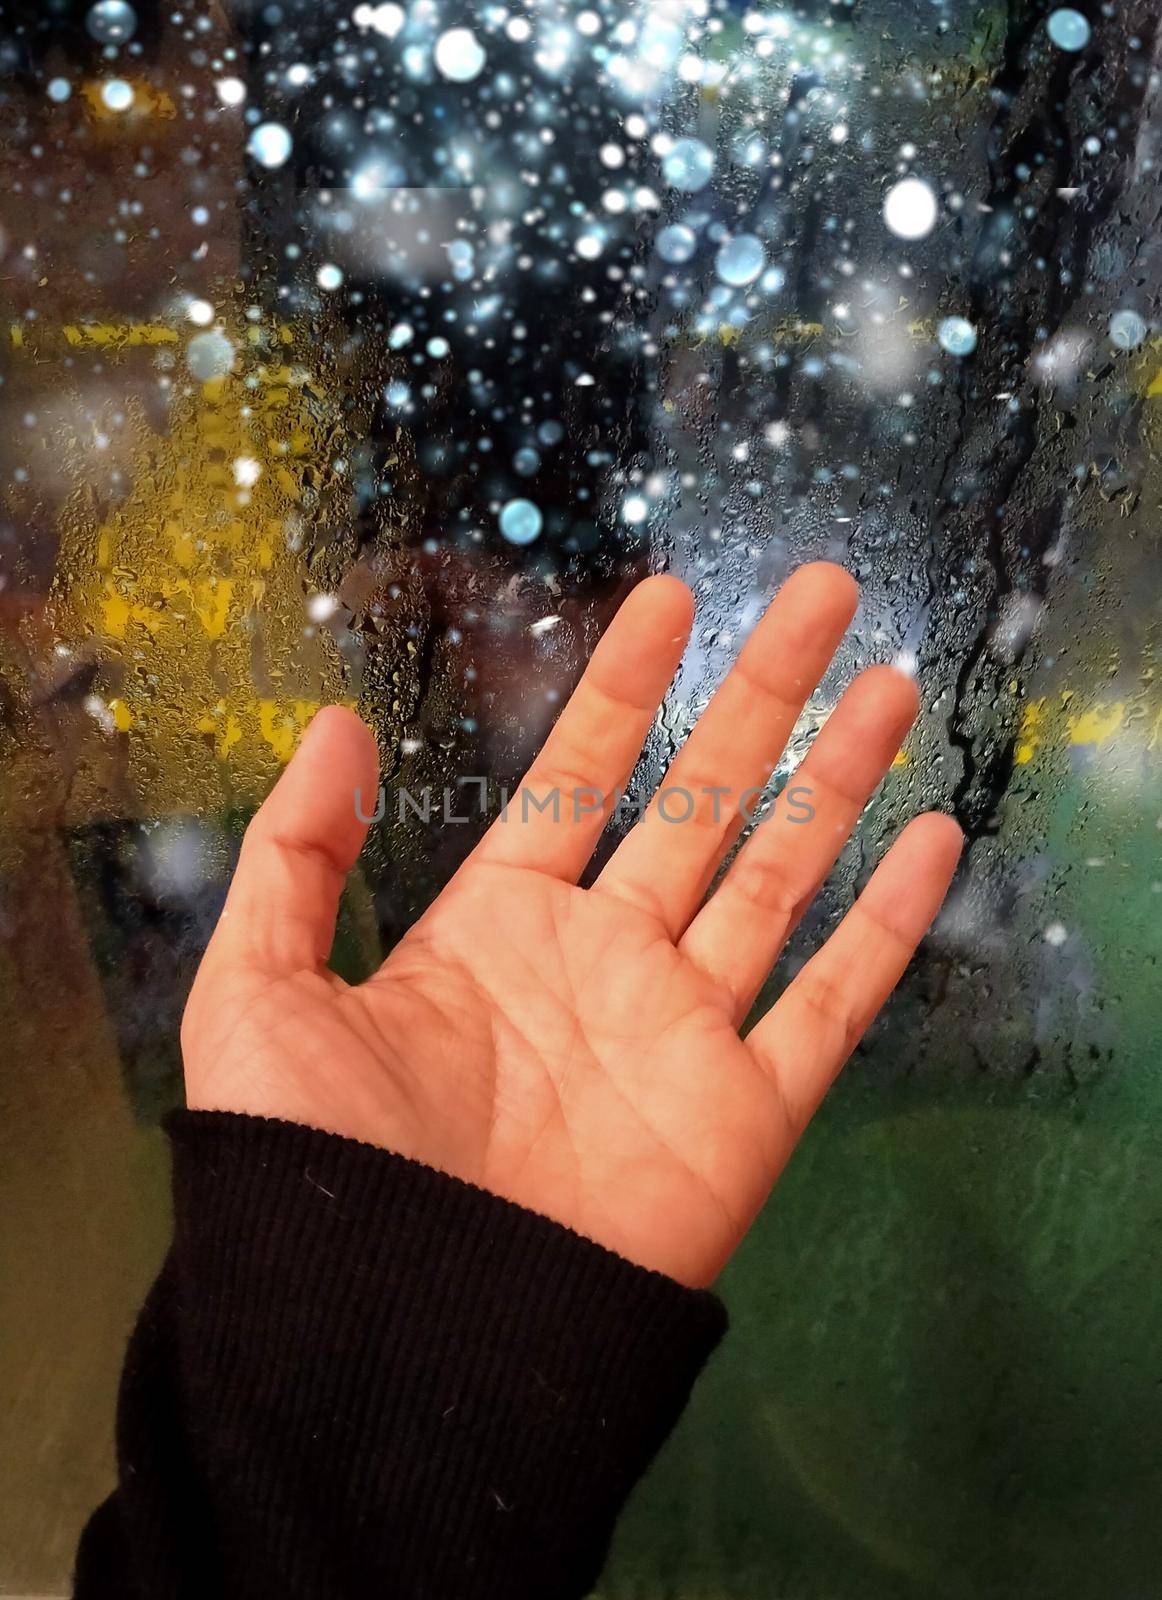 hand of young woman at the window in the rain by Petrichor